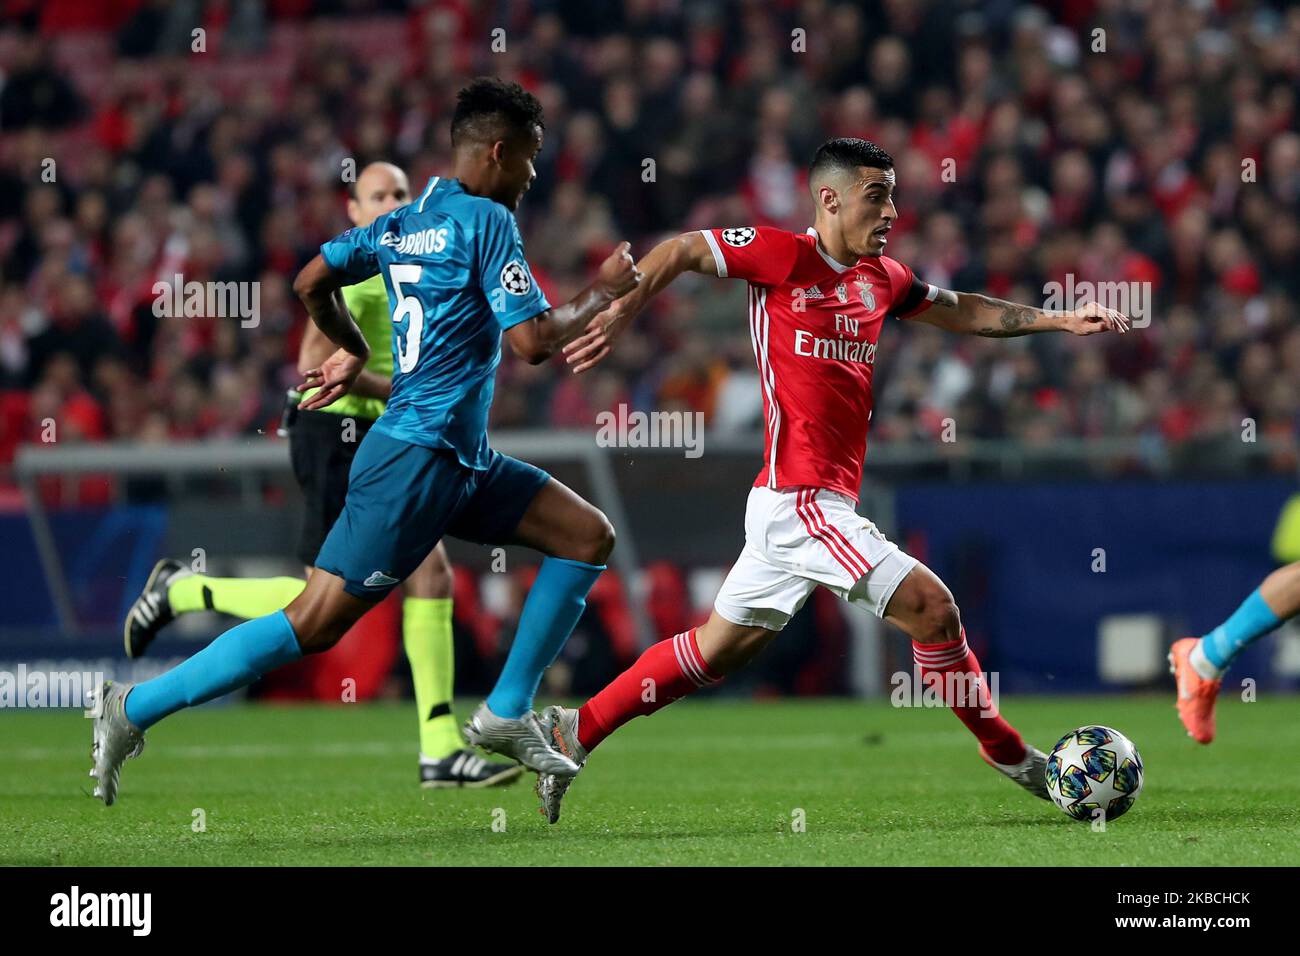 Chiquinho of SL Benfica (R ) vies with Wilmar Barrios of FC Zenit during the UEFA Champions League Group G football match between SL Benfica and FC Zenit at the Luz stadium in Lisbon, Portugal on December 10, 2019. (Photo by Pedro FiÃºza/NurPhoto) Stock Photo